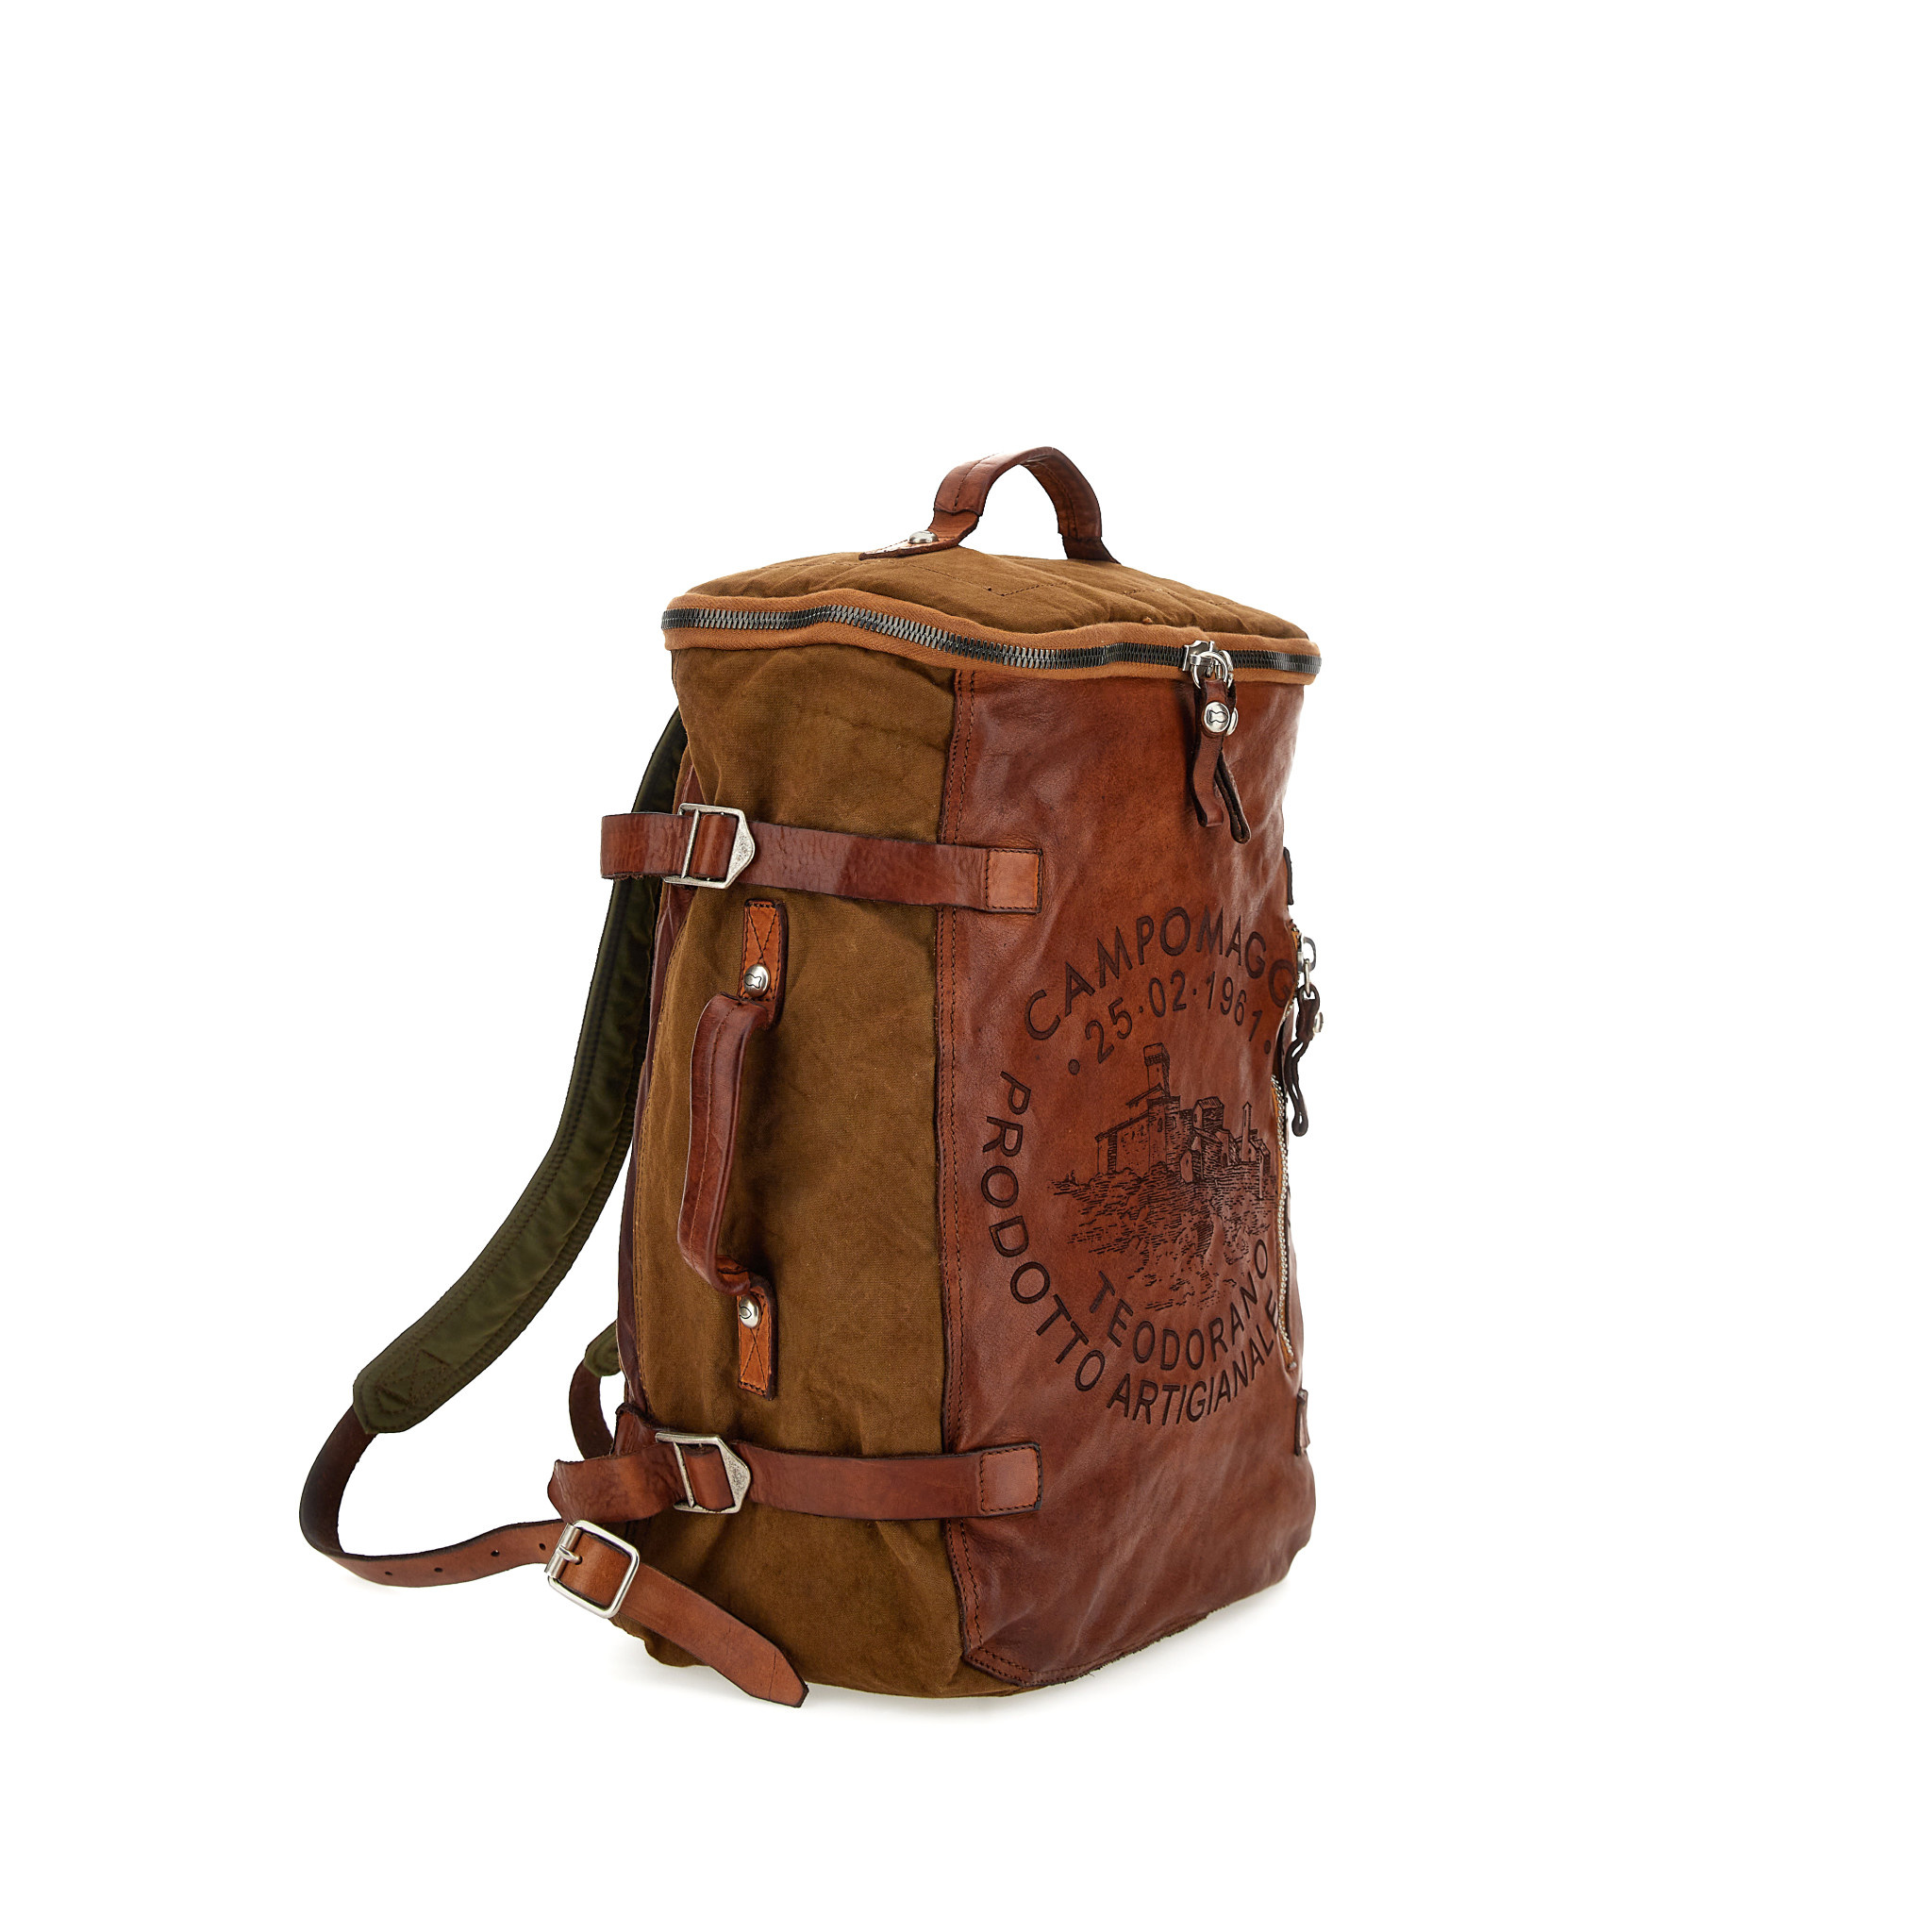 Campomaggi Marte Backpack/Suitcase. Fabric + Leather. P/D Military + D/Cognac